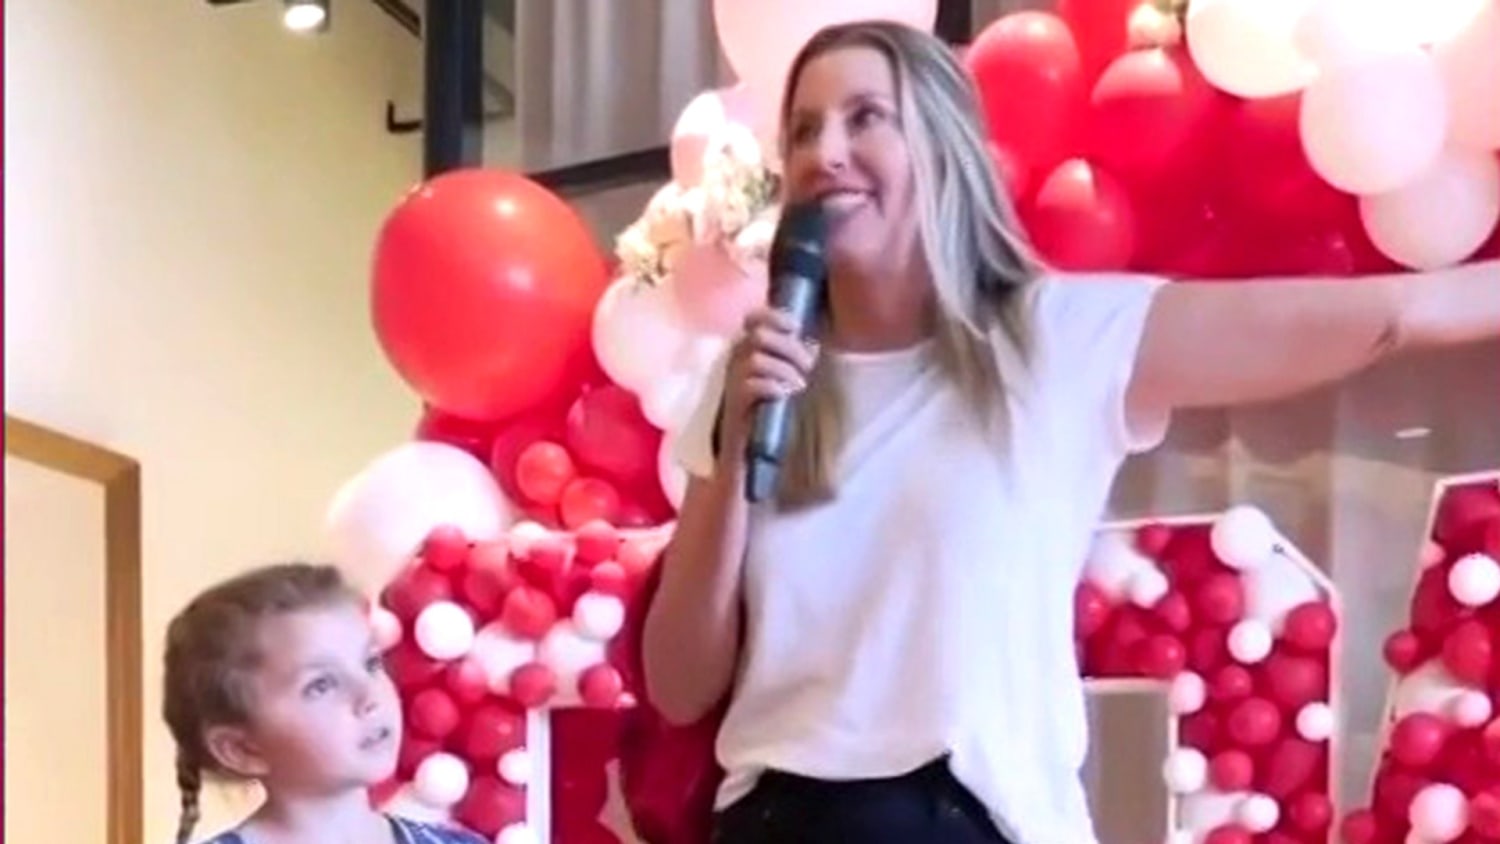 Spanx founder rewards employees with first-class plane tickets and $10,000  as gratitude - Scoop Upworthy